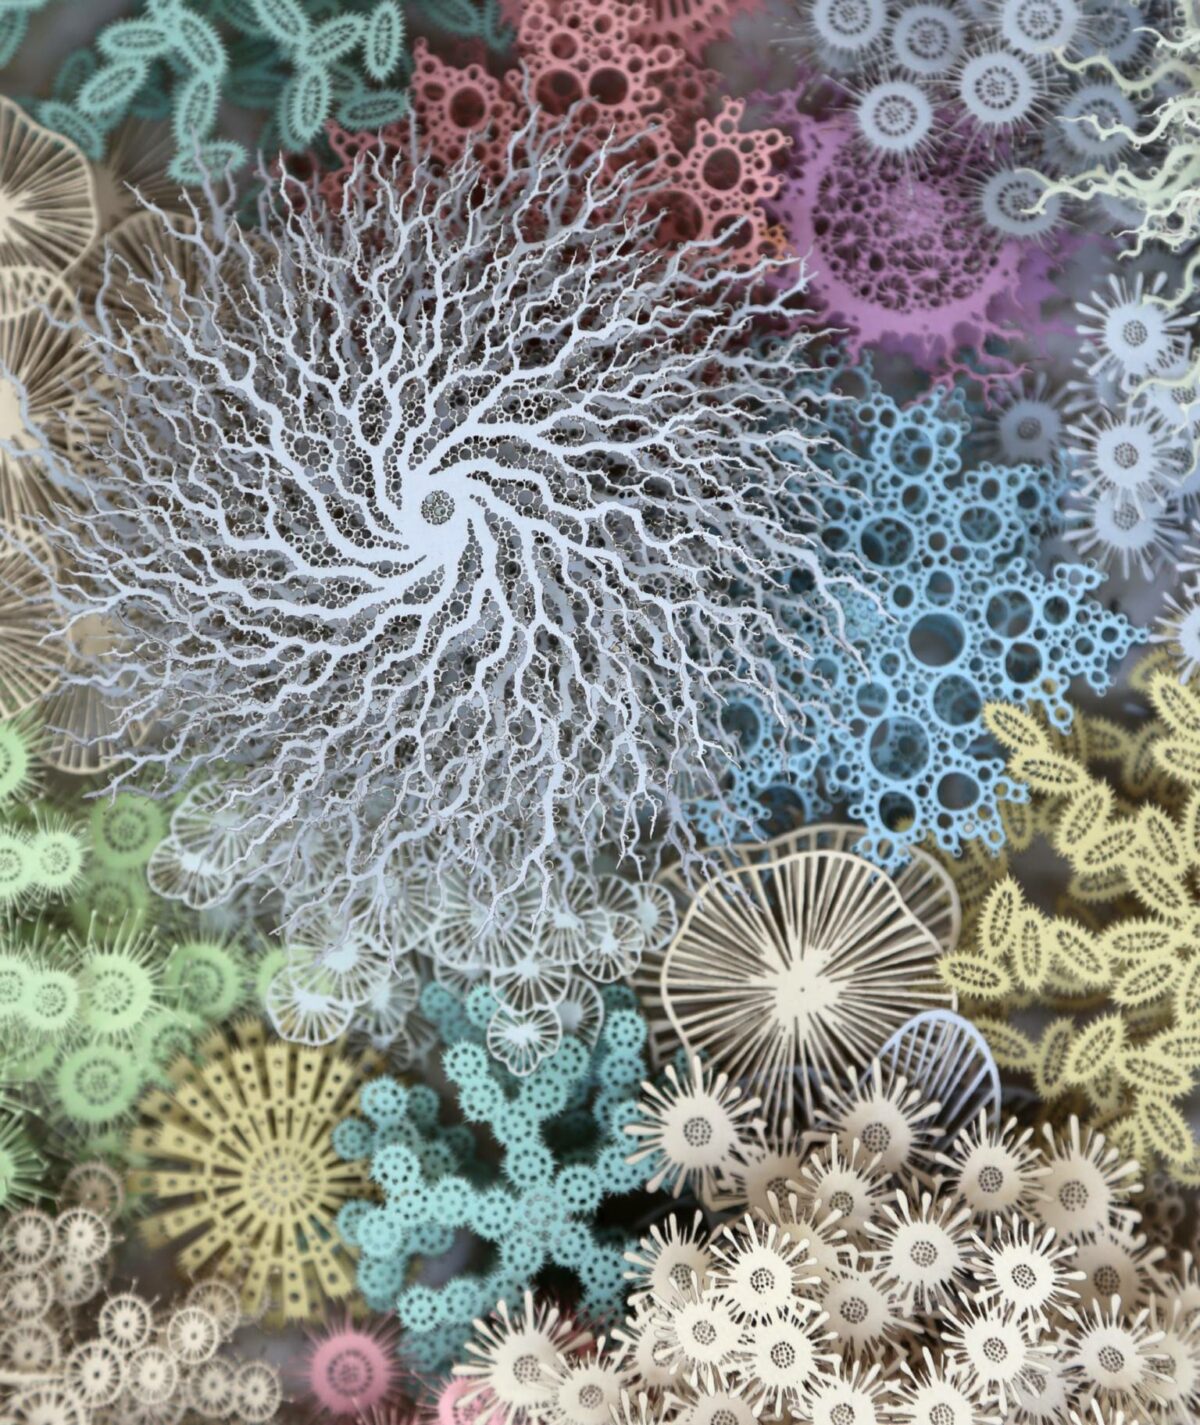 The Beautifully Intricate Paper Cut Sculptures Inspired By Corals And Microorganisms Of Rogan Brown 25